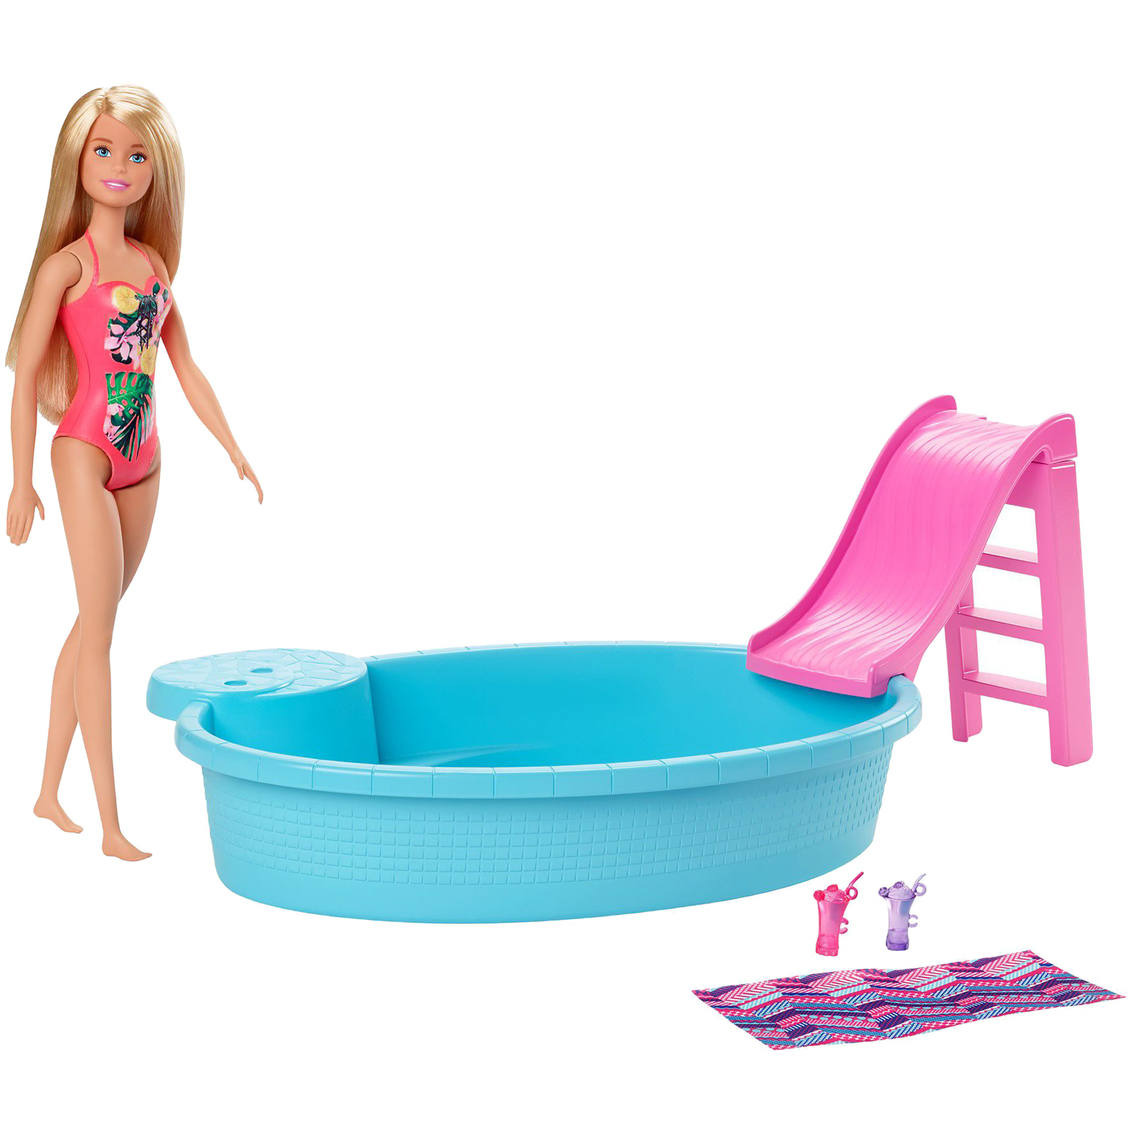 Barbie Pool with Doll Playset - Image 2 of 6